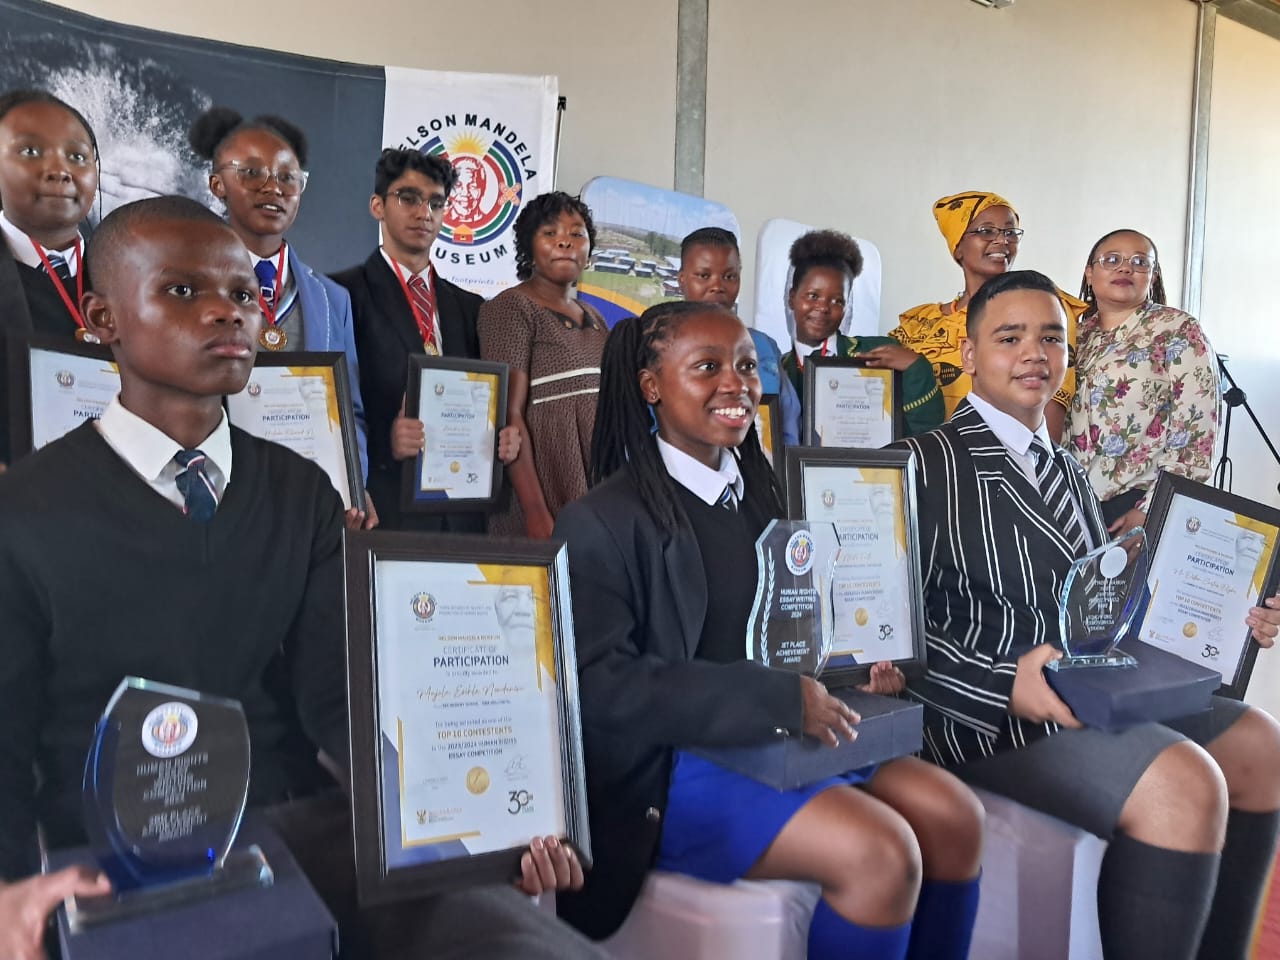 Faith Ntaote National winner of the Nelson Mandela History Essay Competition